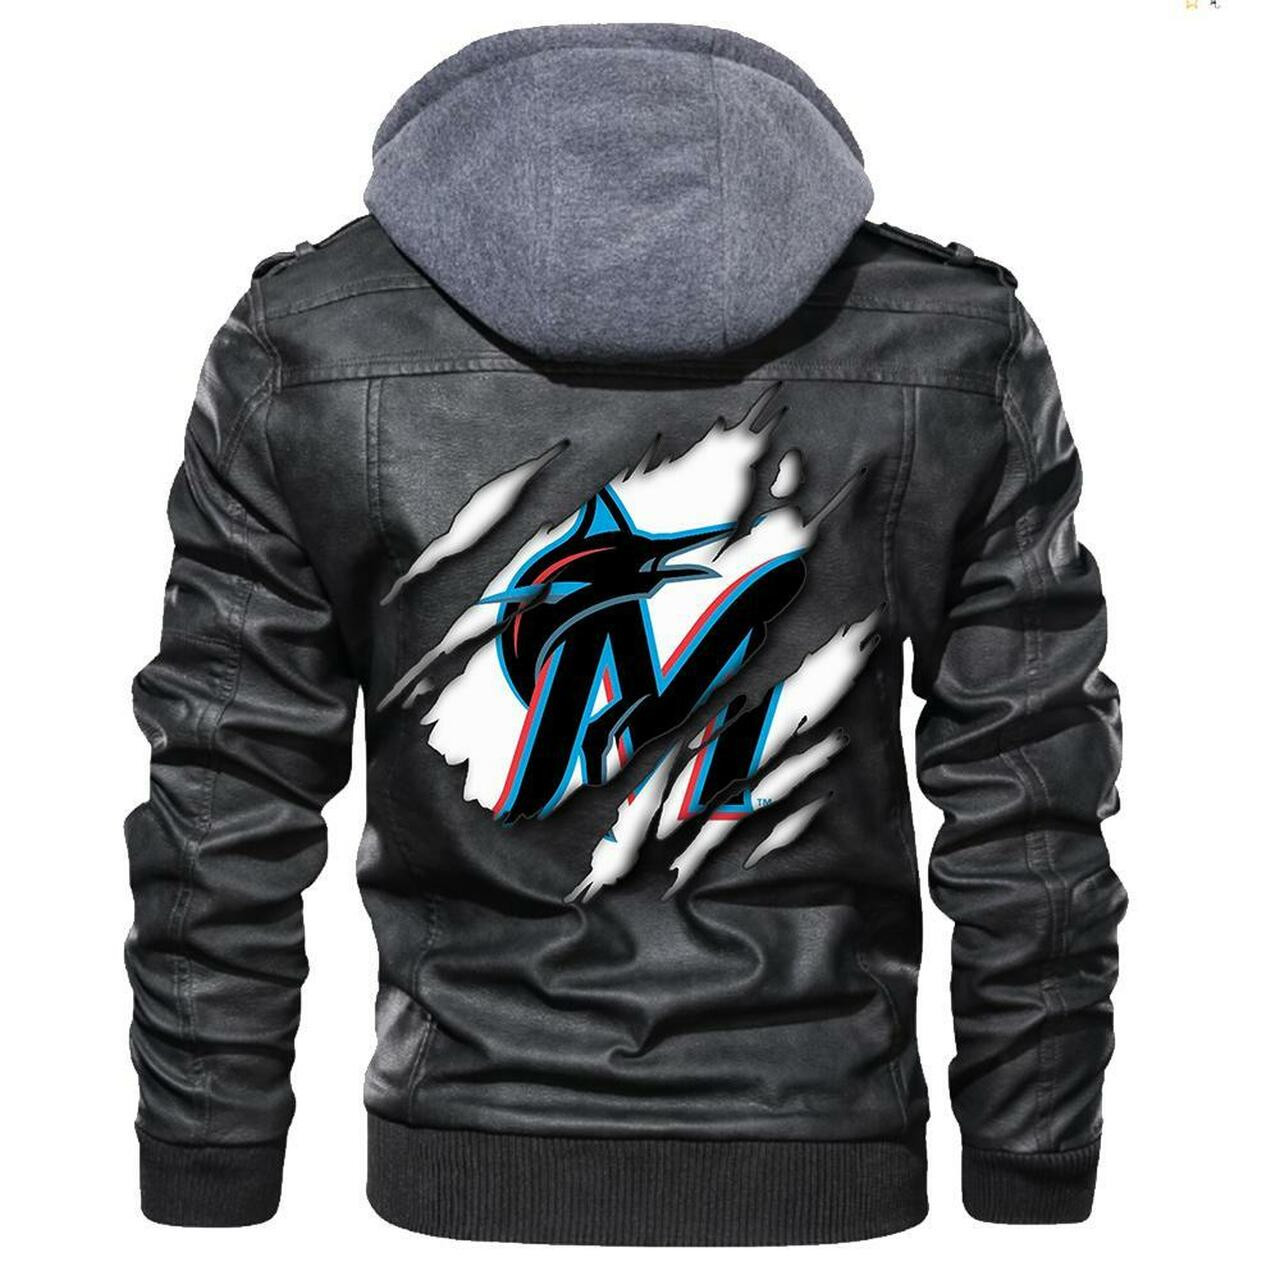 Our store has all of the latest leather jacket 152